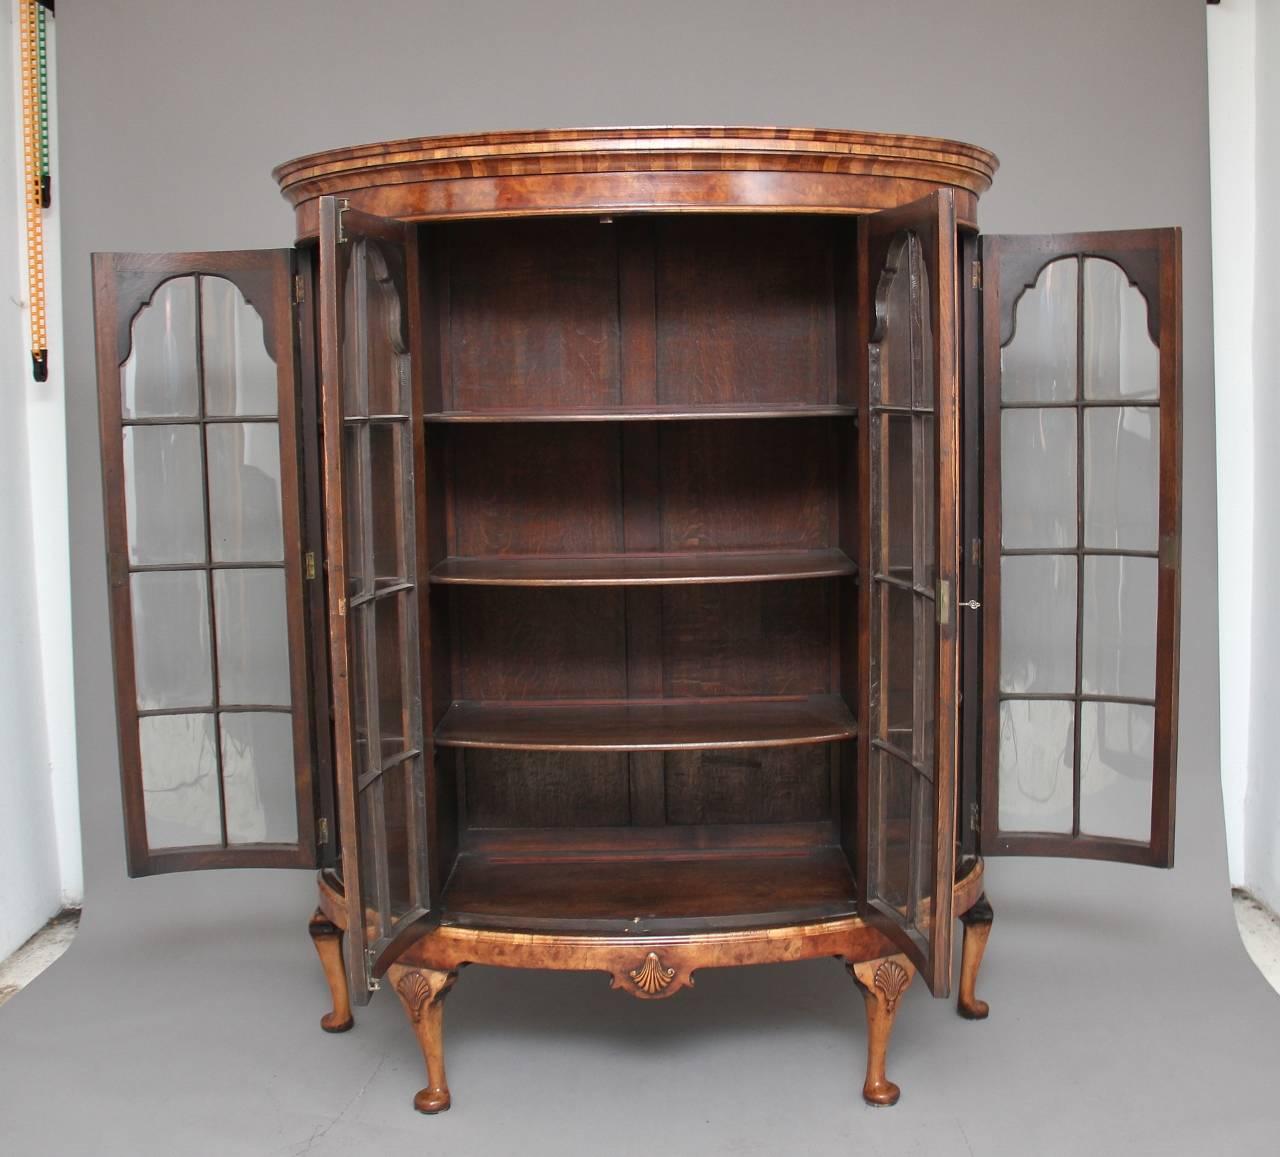 Early 20th century walnut bowfronted display cabinet, the moulded cornice above four arched glazed doors in the Queen Anne style with cross grain mouldings, each door opening to reveal three fixed oak lined shelves inside, the shaped apron below